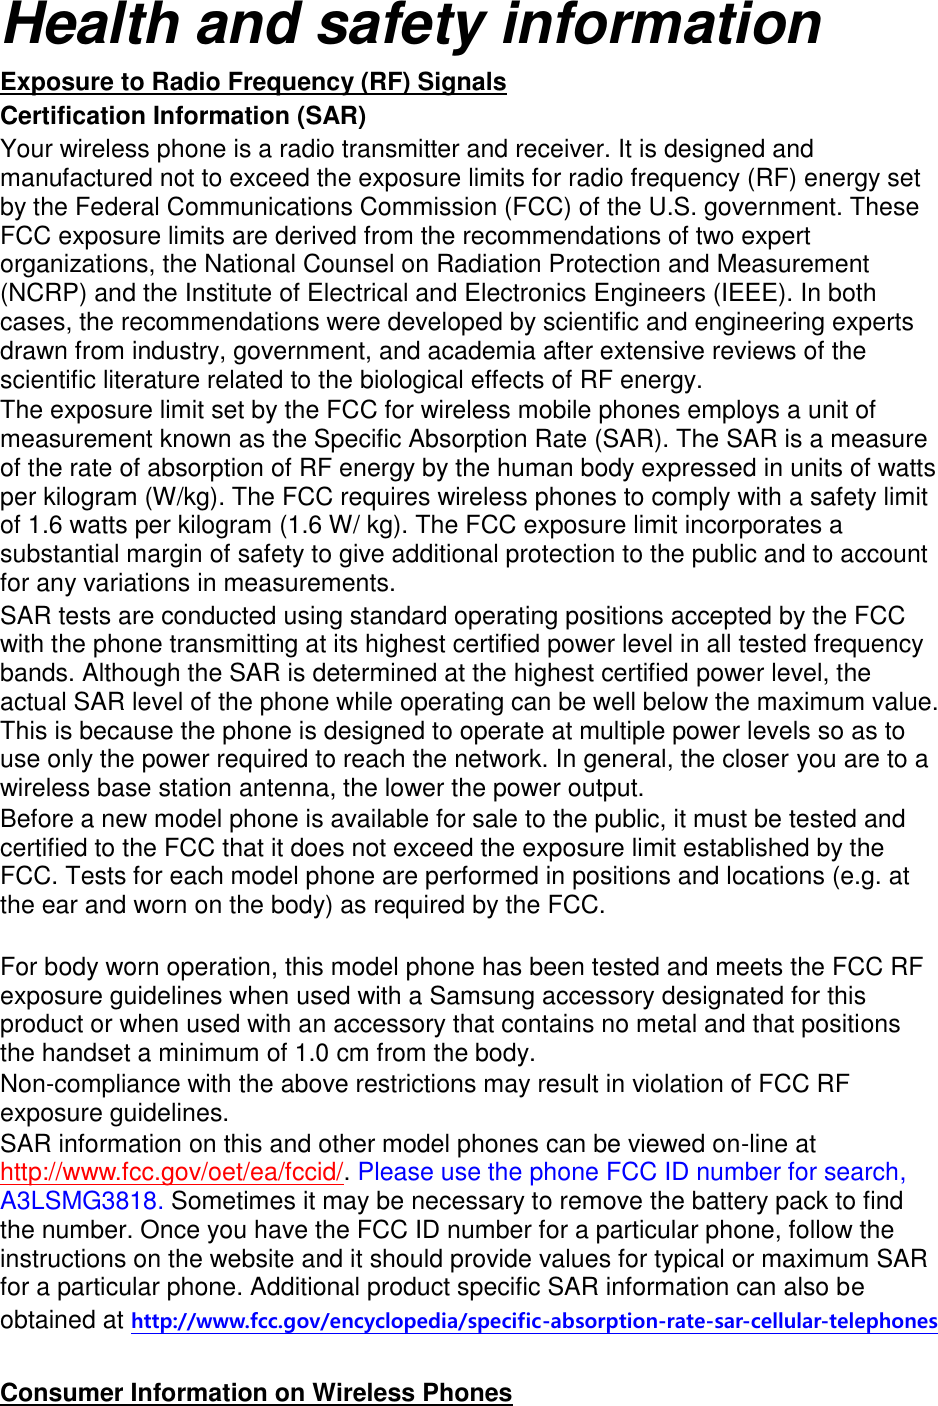 Health and safety information Exposure to Radio Frequency (RF) Signals Certification Information (SAR) Your wireless phone is a radio transmitter and receiver. It is designed and manufactured not to exceed the exposure limits for radio frequency (RF) energy set by the Federal Communications Commission (FCC) of the U.S. government. These FCC exposure limits are derived from the recommendations of two expert organizations, the National Counsel on Radiation Protection and Measurement (NCRP) and the Institute of Electrical and Electronics Engineers (IEEE). In both cases, the recommendations were developed by scientific and engineering experts drawn from industry, government, and academia after extensive reviews of the scientific literature related to the biological effects of RF energy. The exposure limit set by the FCC for wireless mobile phones employs a unit of measurement known as the Specific Absorption Rate (SAR). The SAR is a measure of the rate of absorption of RF energy by the human body expressed in units of watts per kilogram (W/kg). The FCC requires wireless phones to comply with a safety limit of 1.6 watts per kilogram (1.6 W/ kg). The FCC exposure limit incorporates a substantial margin of safety to give additional protection to the public and to account for any variations in measurements. SAR tests are conducted using standard operating positions accepted by the FCC with the phone transmitting at its highest certified power level in all tested frequency bands. Although the SAR is determined at the highest certified power level, the actual SAR level of the phone while operating can be well below the maximum value. This is because the phone is designed to operate at multiple power levels so as to use only the power required to reach the network. In general, the closer you are to a wireless base station antenna, the lower the power output. Before a new model phone is available for sale to the public, it must be tested and certified to the FCC that it does not exceed the exposure limit established by the FCC. Tests for each model phone are performed in positions and locations (e.g. at the ear and worn on the body) as required by the FCC.      For body worn operation, this model phone has been tested and meets the FCC RF exposure guidelines when used with a Samsung accessory designated for this product or when used with an accessory that contains no metal and that positions the handset a minimum of 1.0 cm from the body.   Non-compliance with the above restrictions may result in violation of FCC RF exposure guidelines. SAR information on this and other model phones can be viewed on-line at http://www.fcc.gov/oet/ea/fccid/. Please use the phone FCC ID number for search, A3LSMG3818. Sometimes it may be necessary to remove the battery pack to find the number. Once you have the FCC ID number for a particular phone, follow the instructions on the website and it should provide values for typical or maximum SAR for a particular phone. Additional product specific SAR information can also be obtained at http://www.fcc.gov/encyclopedia/specific-absorption-rate-sar-cellular-telephones  Consumer Information on Wireless Phones 